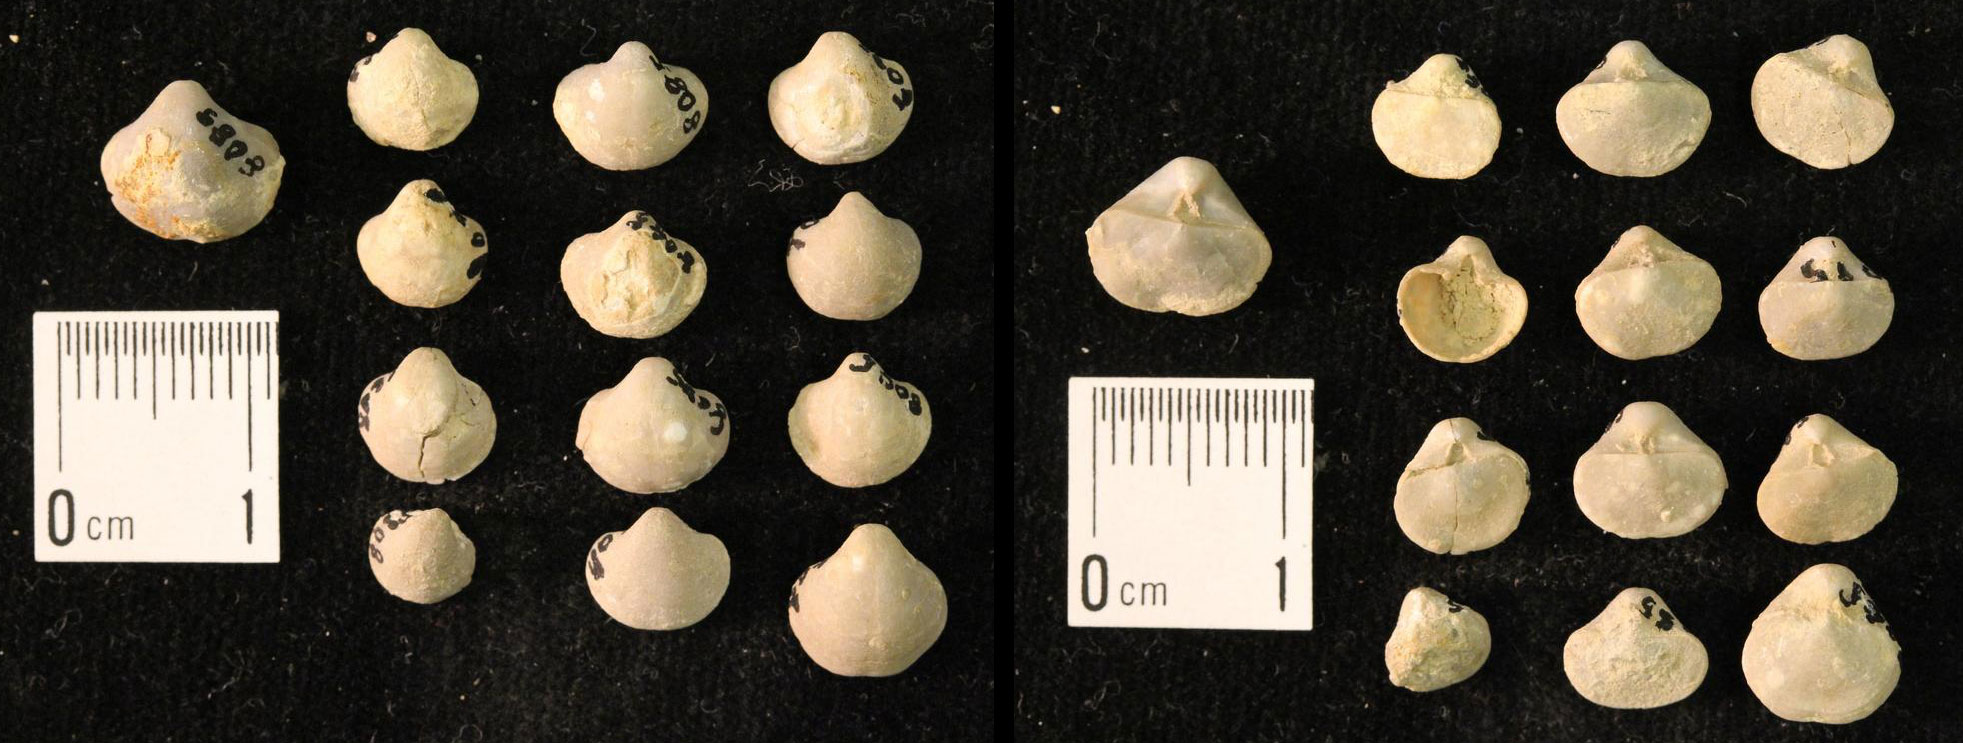 2-Panel figure showing photographs of 13 branchiopod shells in two views, from above and below. The shells are fan-shaped, with the narrow end forming the hinge. The surfaces of the shells are smooth, and they are dull beige in color. The shells are less than 1 centimeter wide.